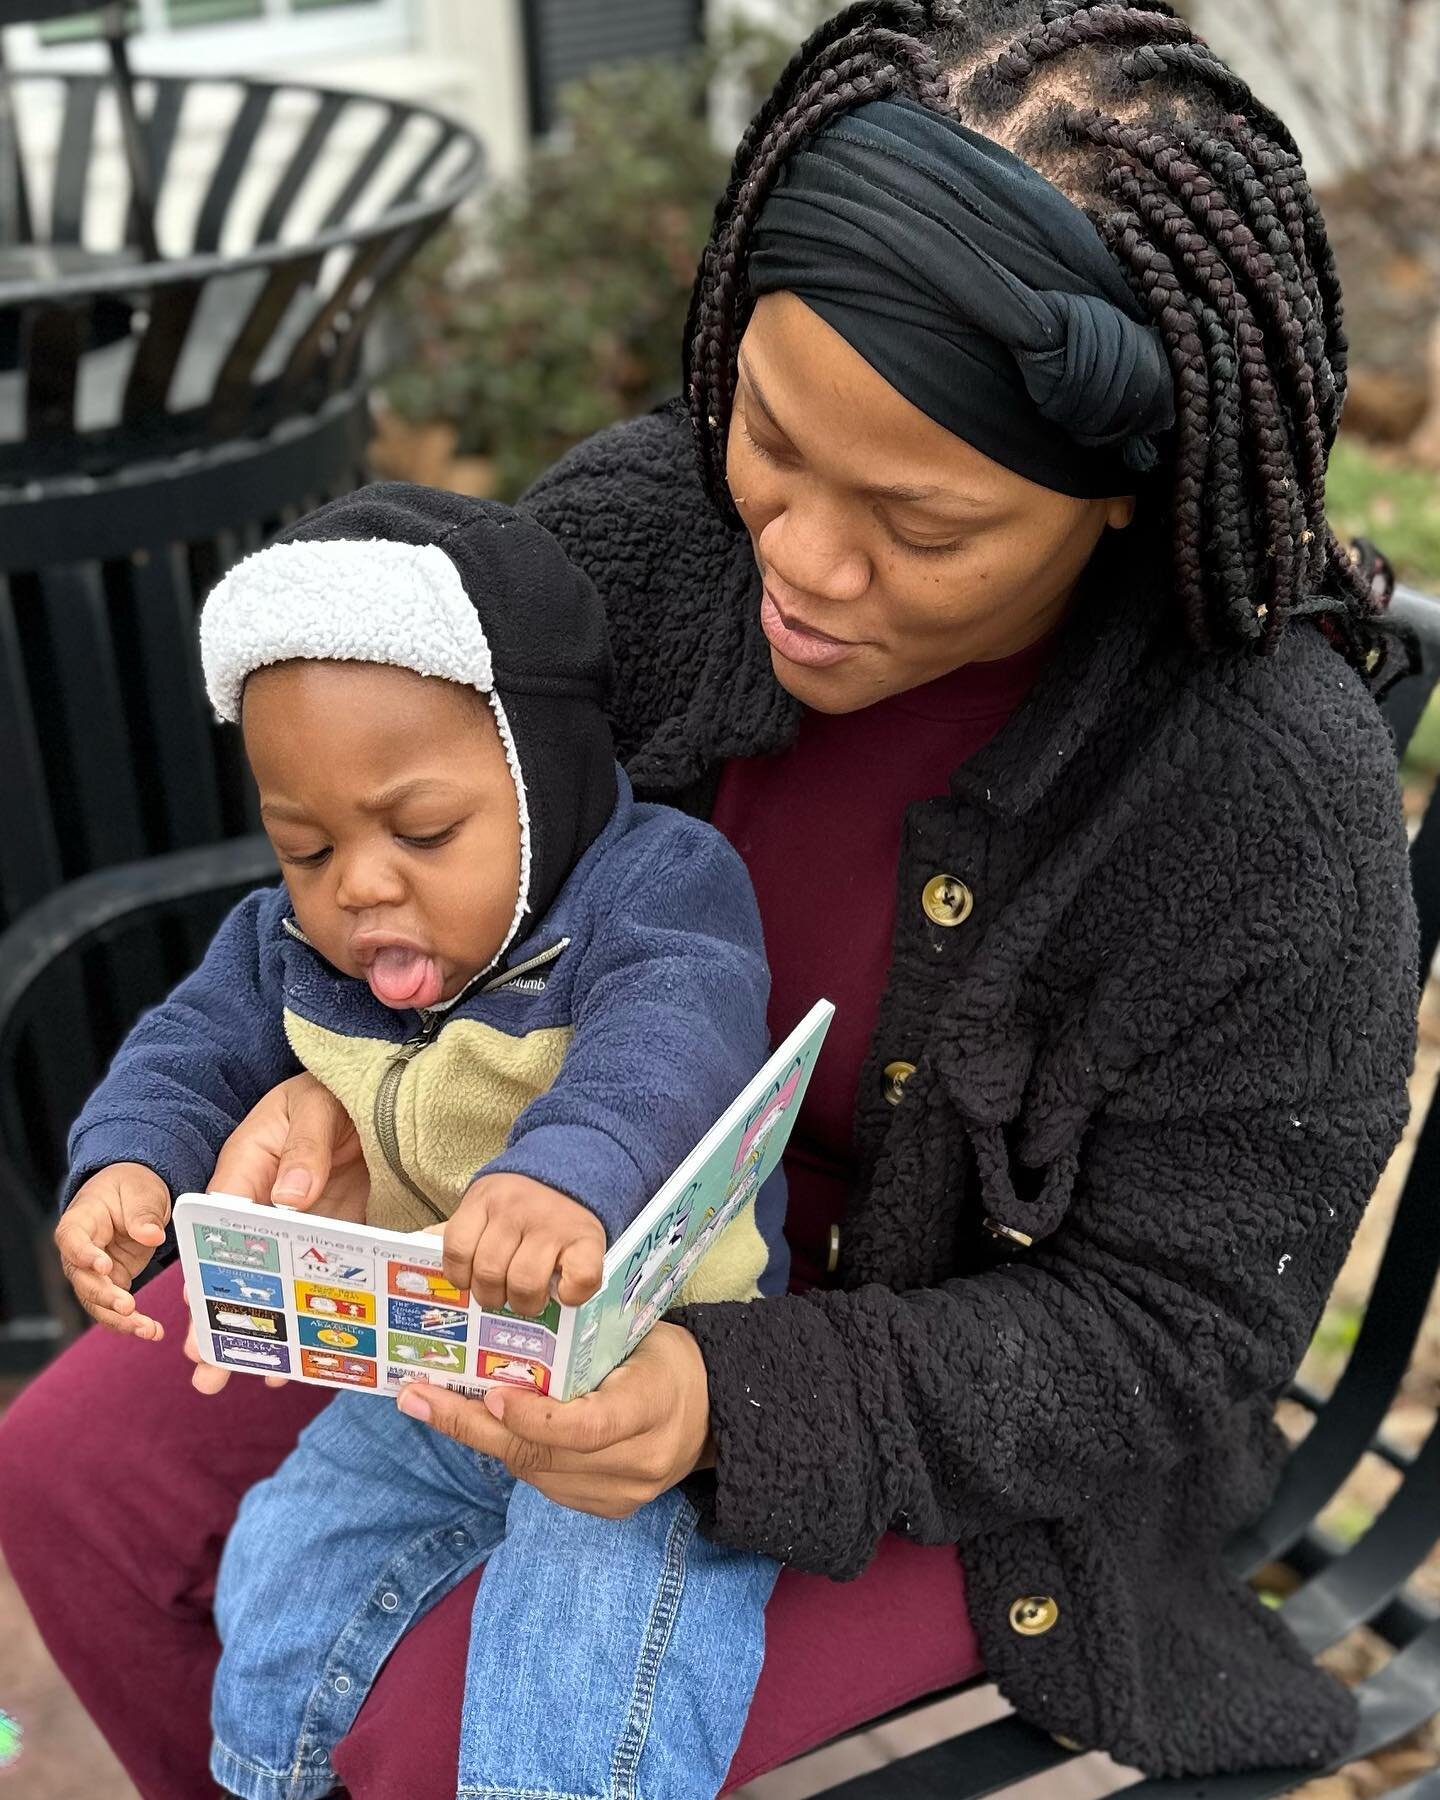 Those who read one picture book each day to their children will have exposed them to 78,000 words each year. #wordsmatter #literacy #mississippi #letstalkaboutit #freebooks #languagedevelopment #earlychildhood #thankateacher #teachersmatter #mostimpo